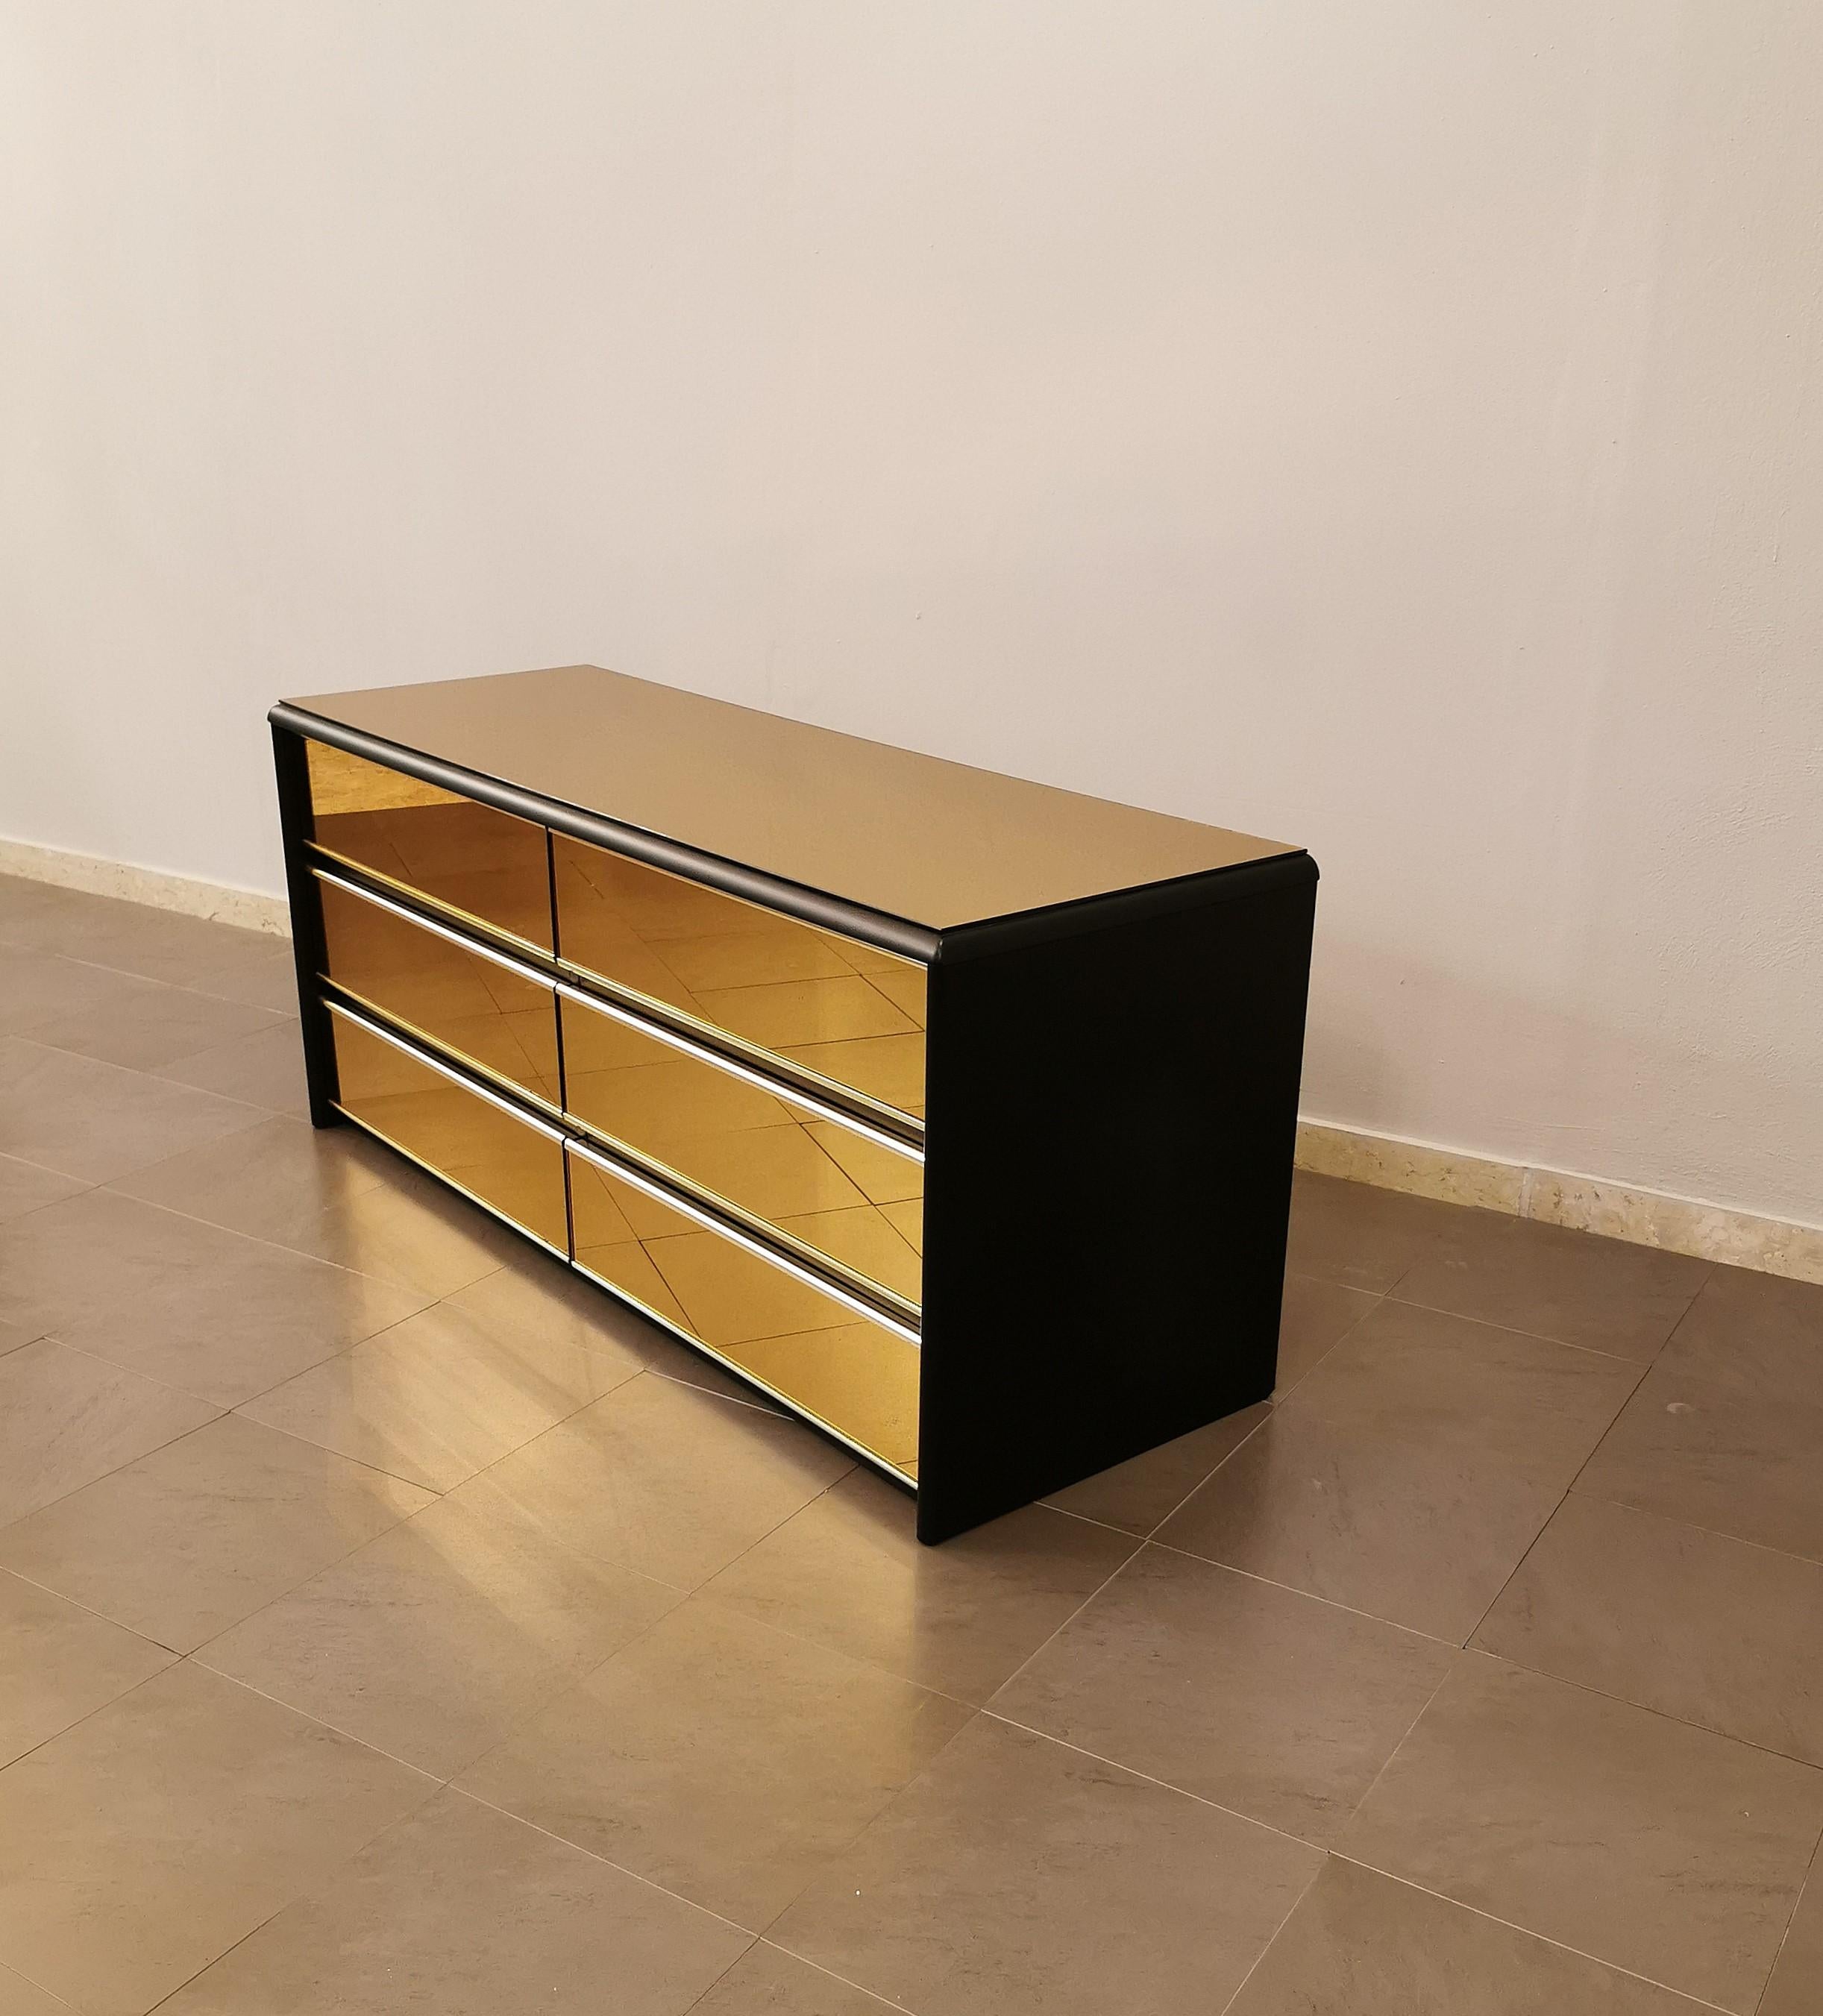 20th Century Midcentury Modern Dresser Chest of Drawers Mirrored Glass Black Wood Italy 1970s